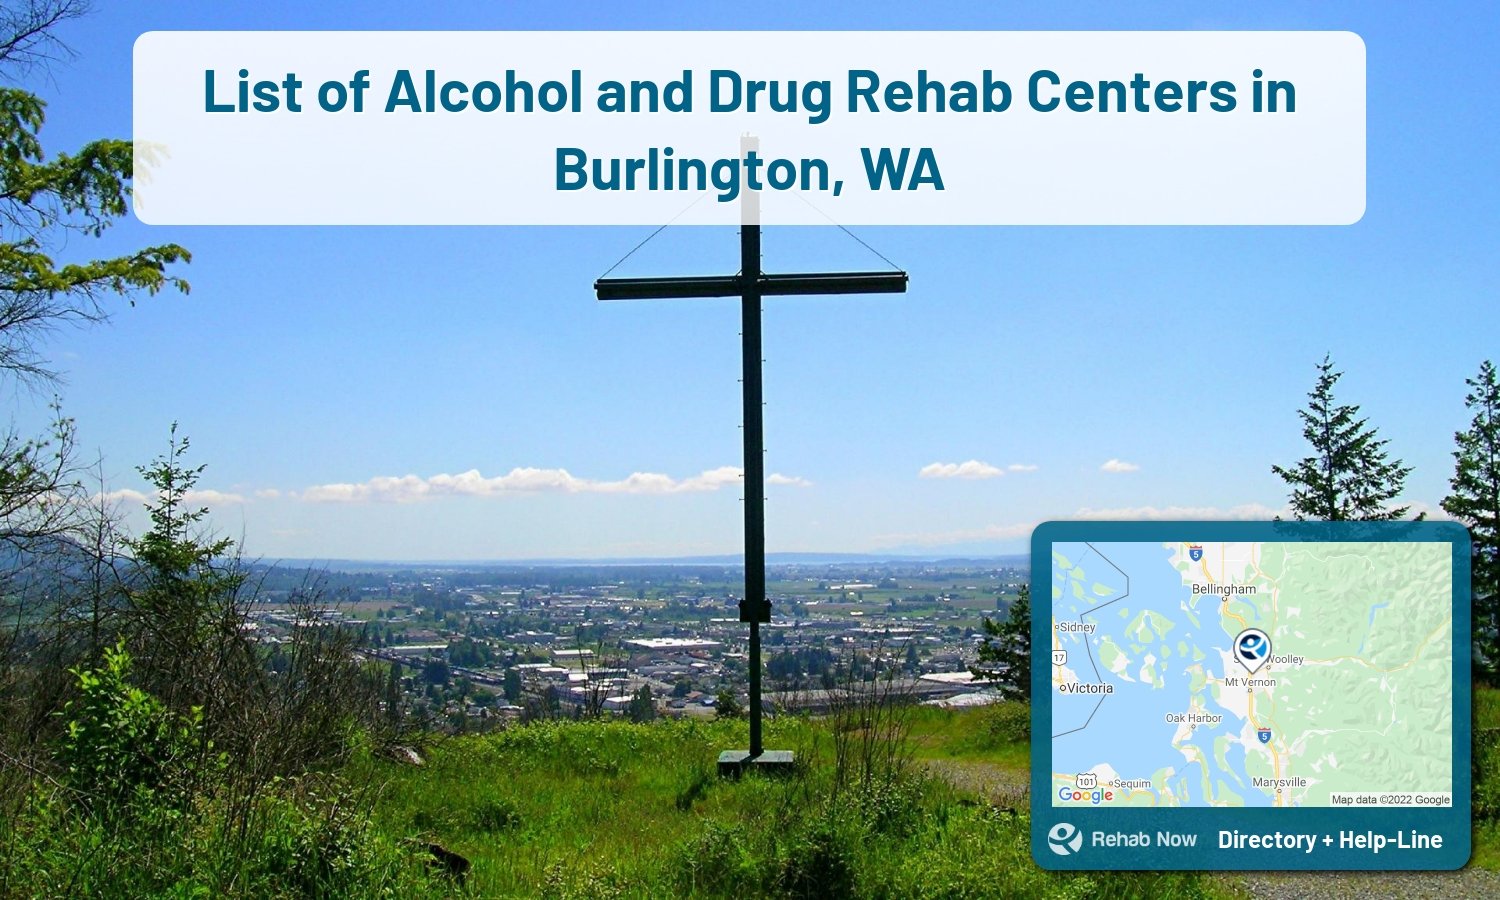 Drug rehab and alcohol treatment services nearby Burlington, WA. Need help choosing a treatment program? Call our free hotline!